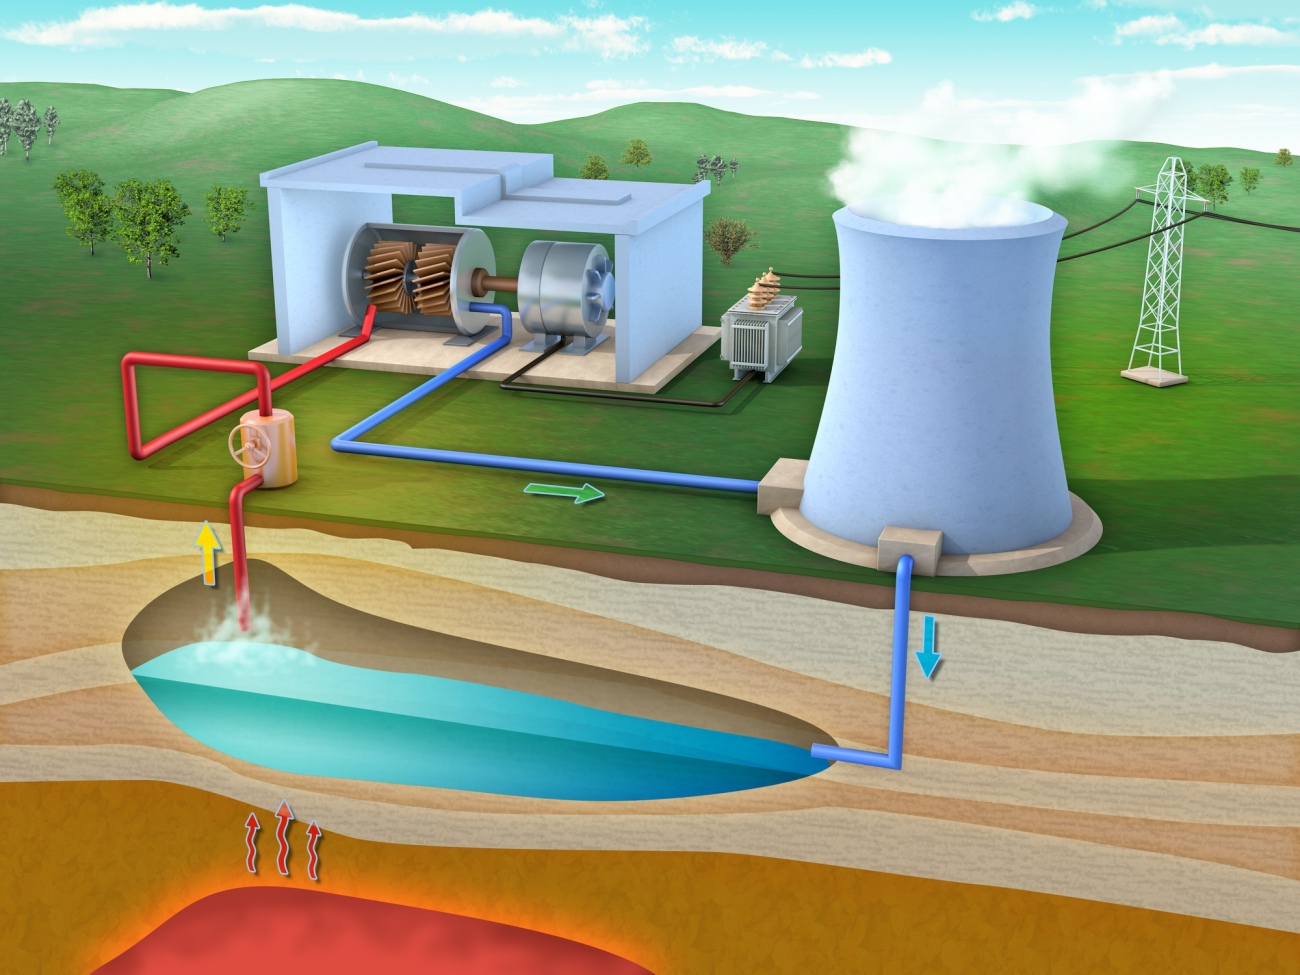 Geothermal power station